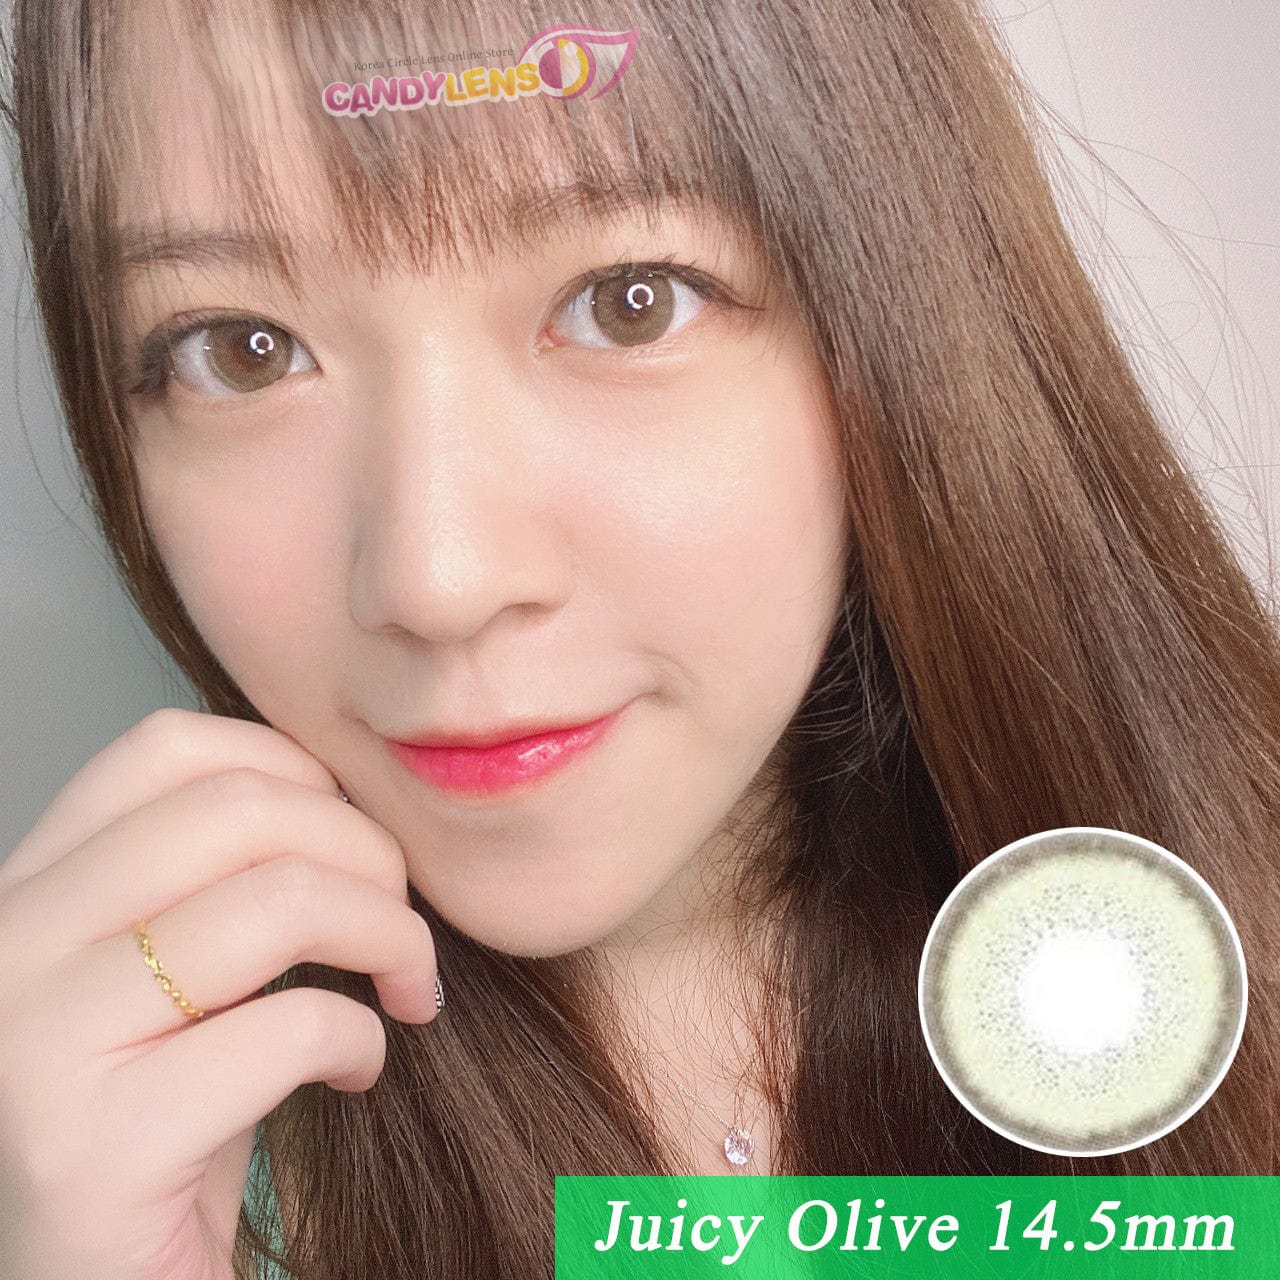 Royal Candy (monthly) Juicy Olive